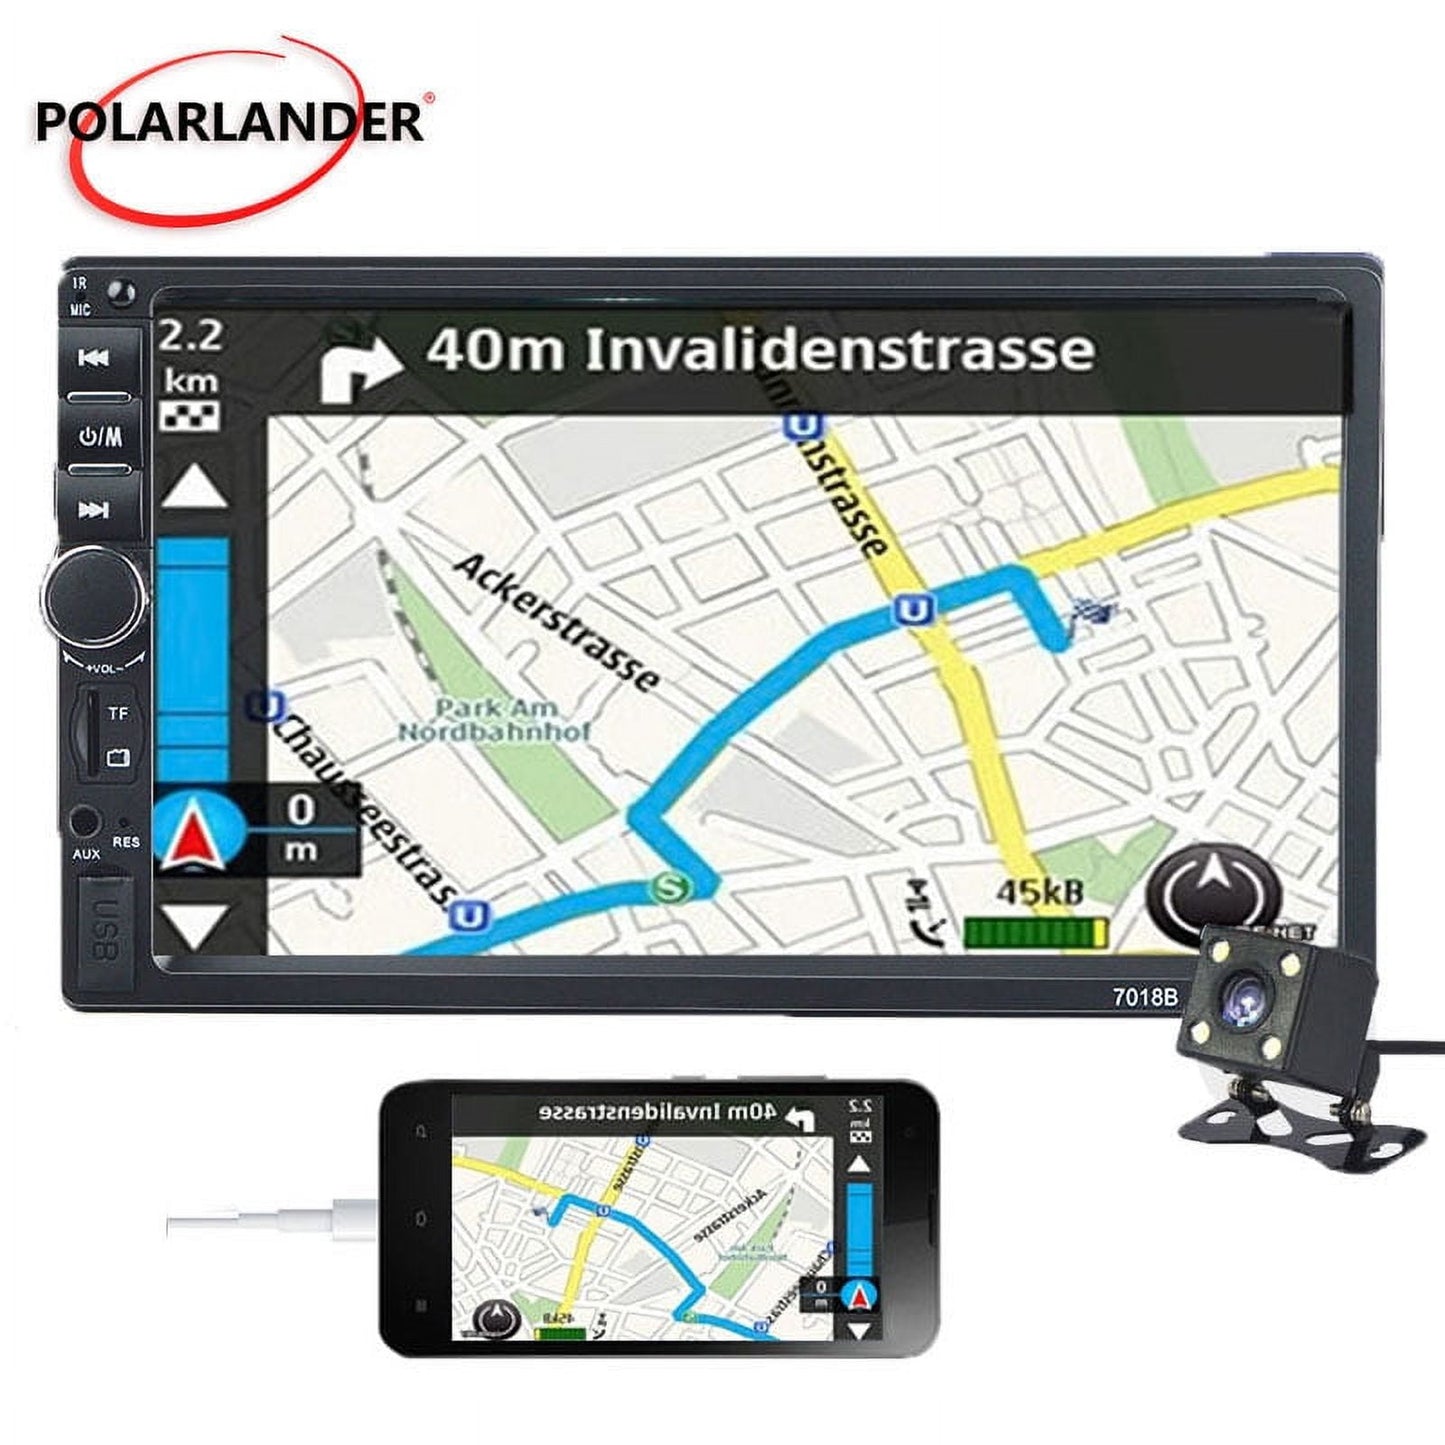 Polarlander Double Din Car Stereo Player Car Audio 7-inch HD Touch Screen Car Radio Bluetooth with Multimedia SD USB FM AUX MP5/4/3 Mirror Link Function with 4LED Backup Camera